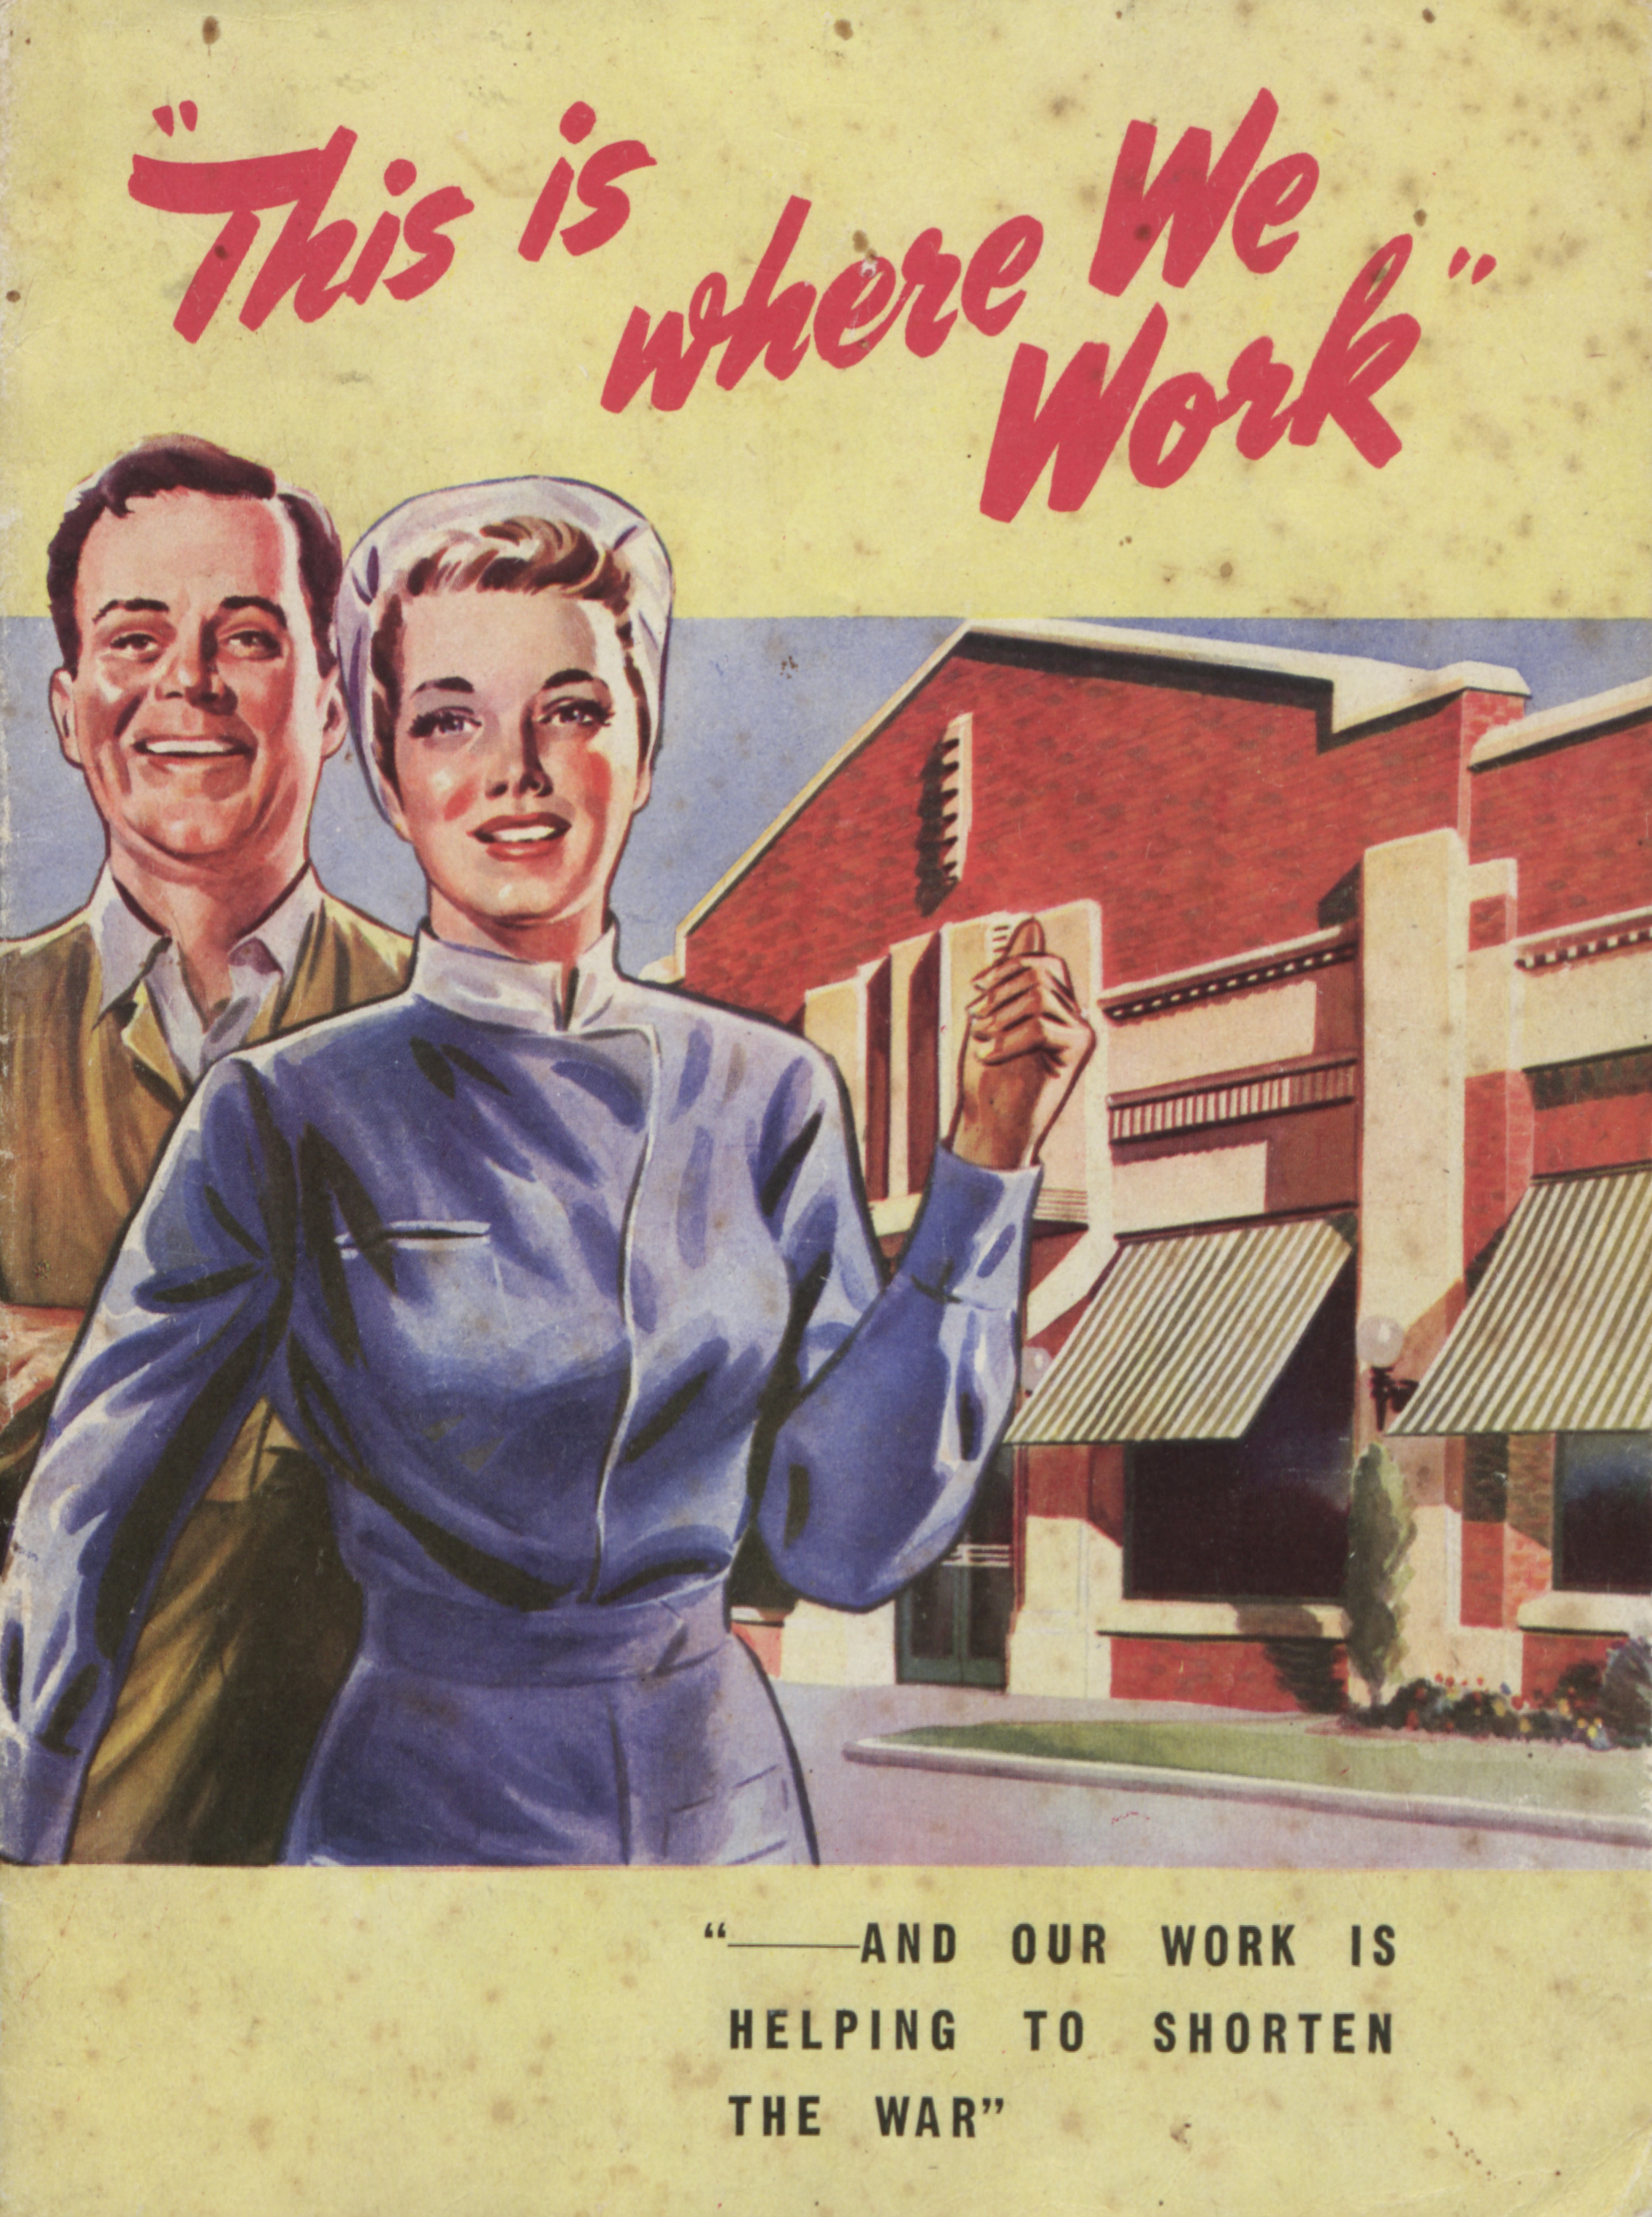 Cover for pamphlet titled "This is where we work", color illustration of a man and woman in front of an automobile plant.